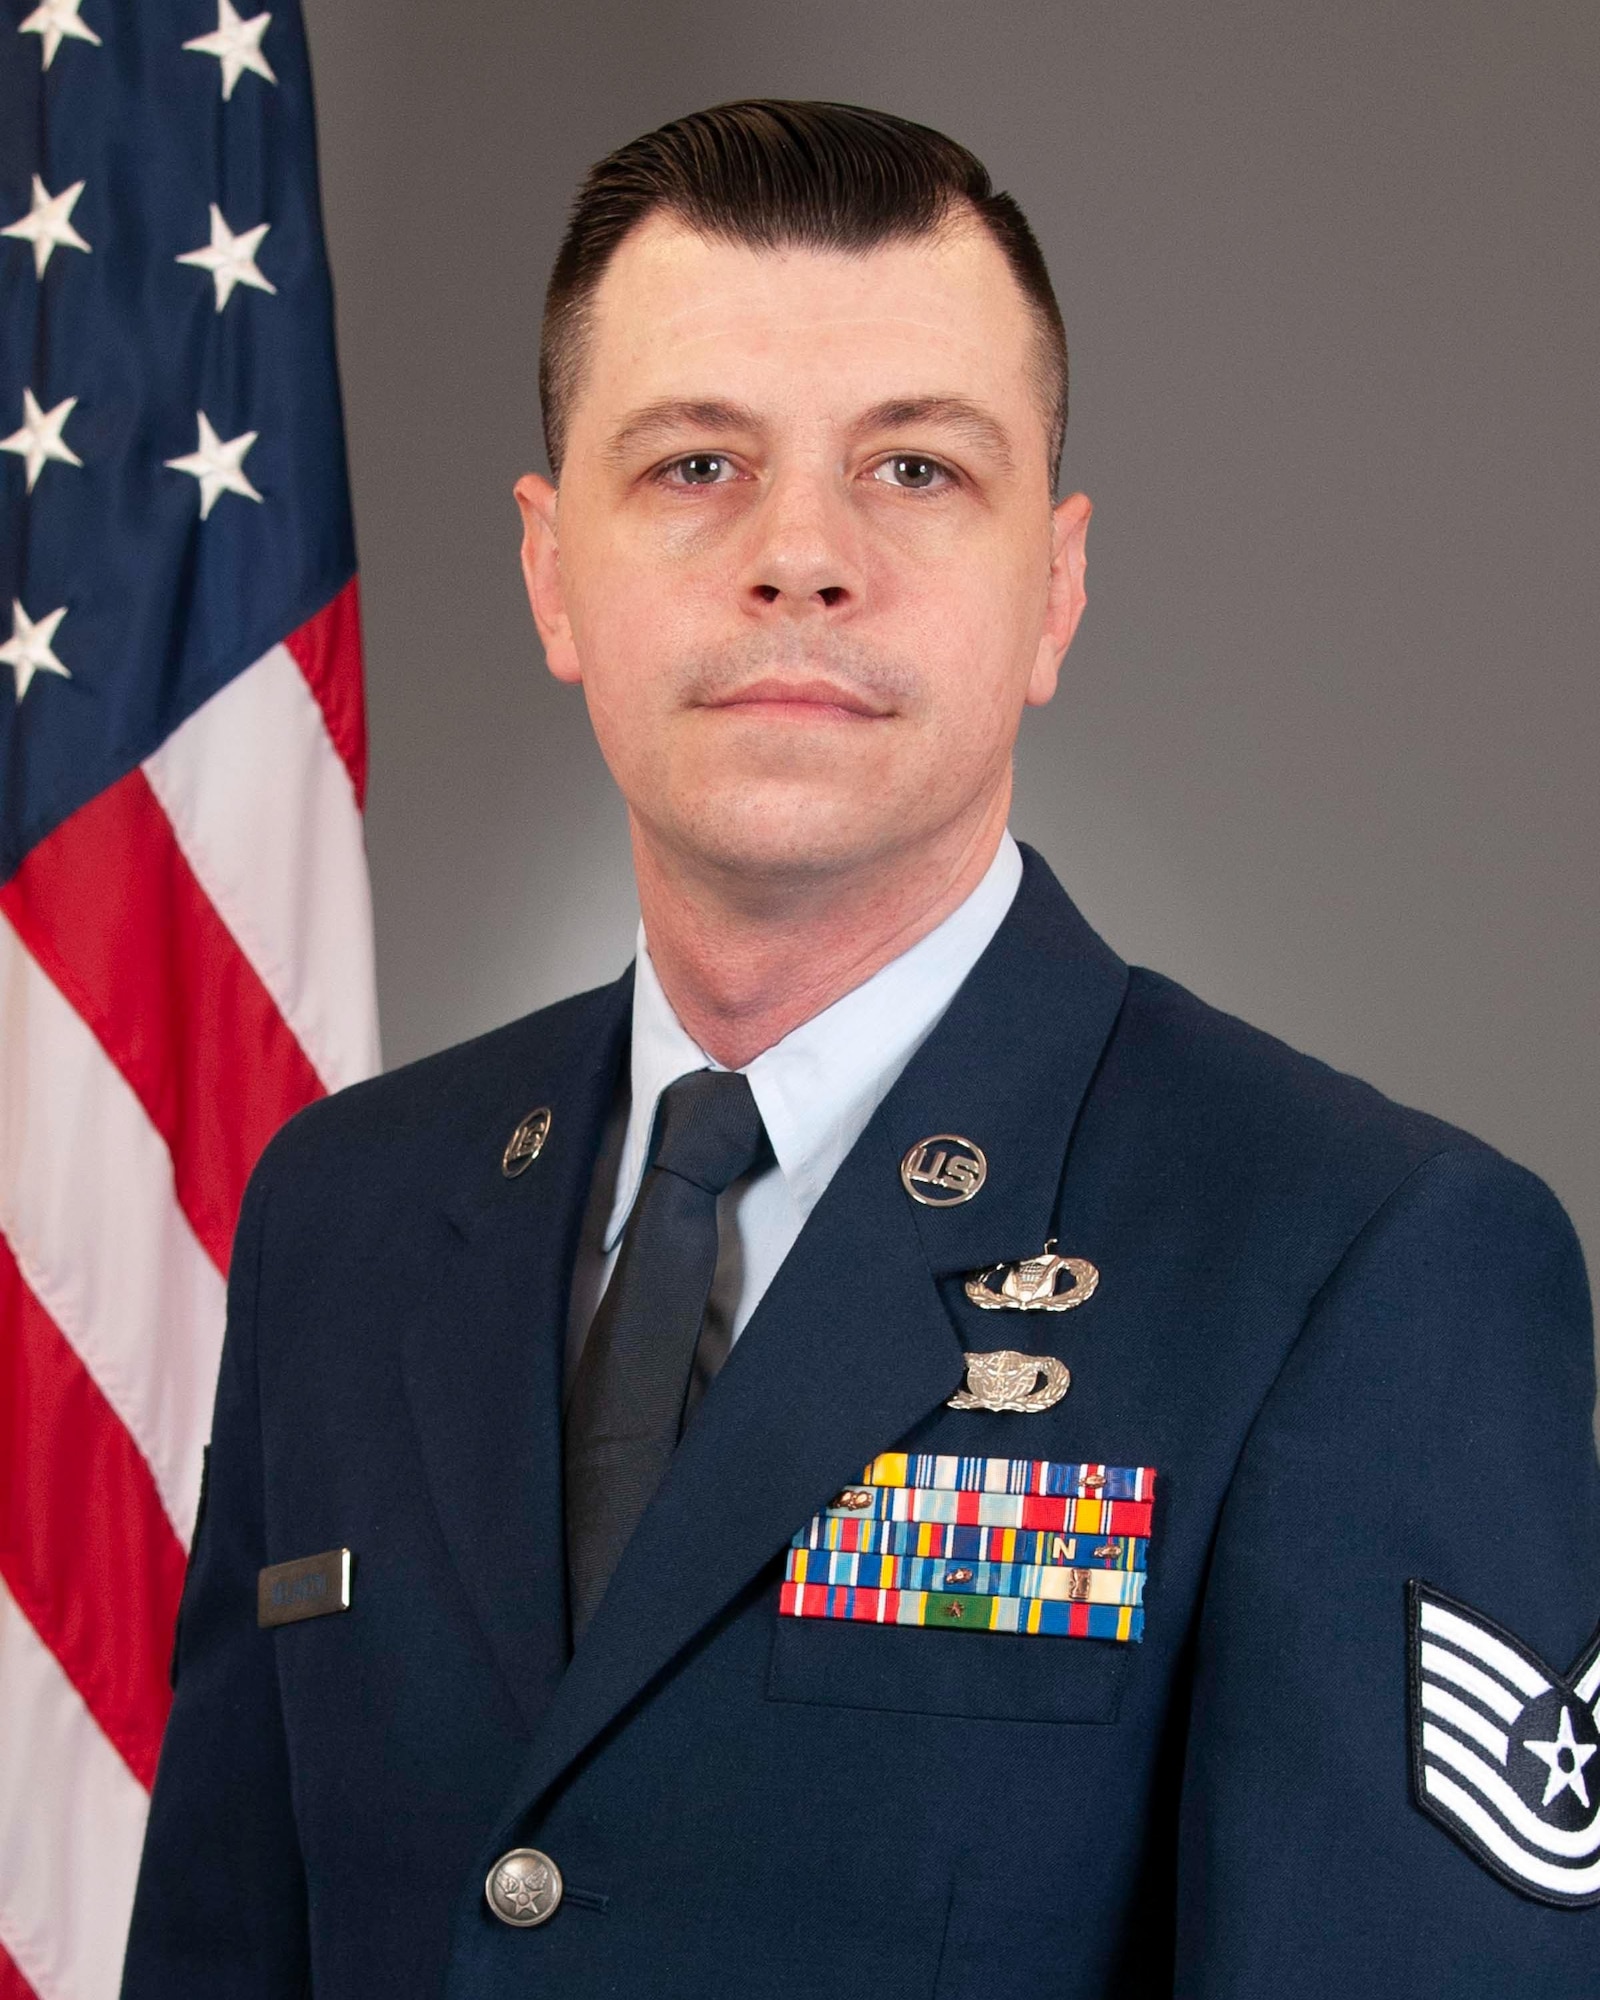 Official photo of the Air Force Reserve Command's 2021 Outstanding NCO of the Year, Tech. Sgt. Clint Melancon.